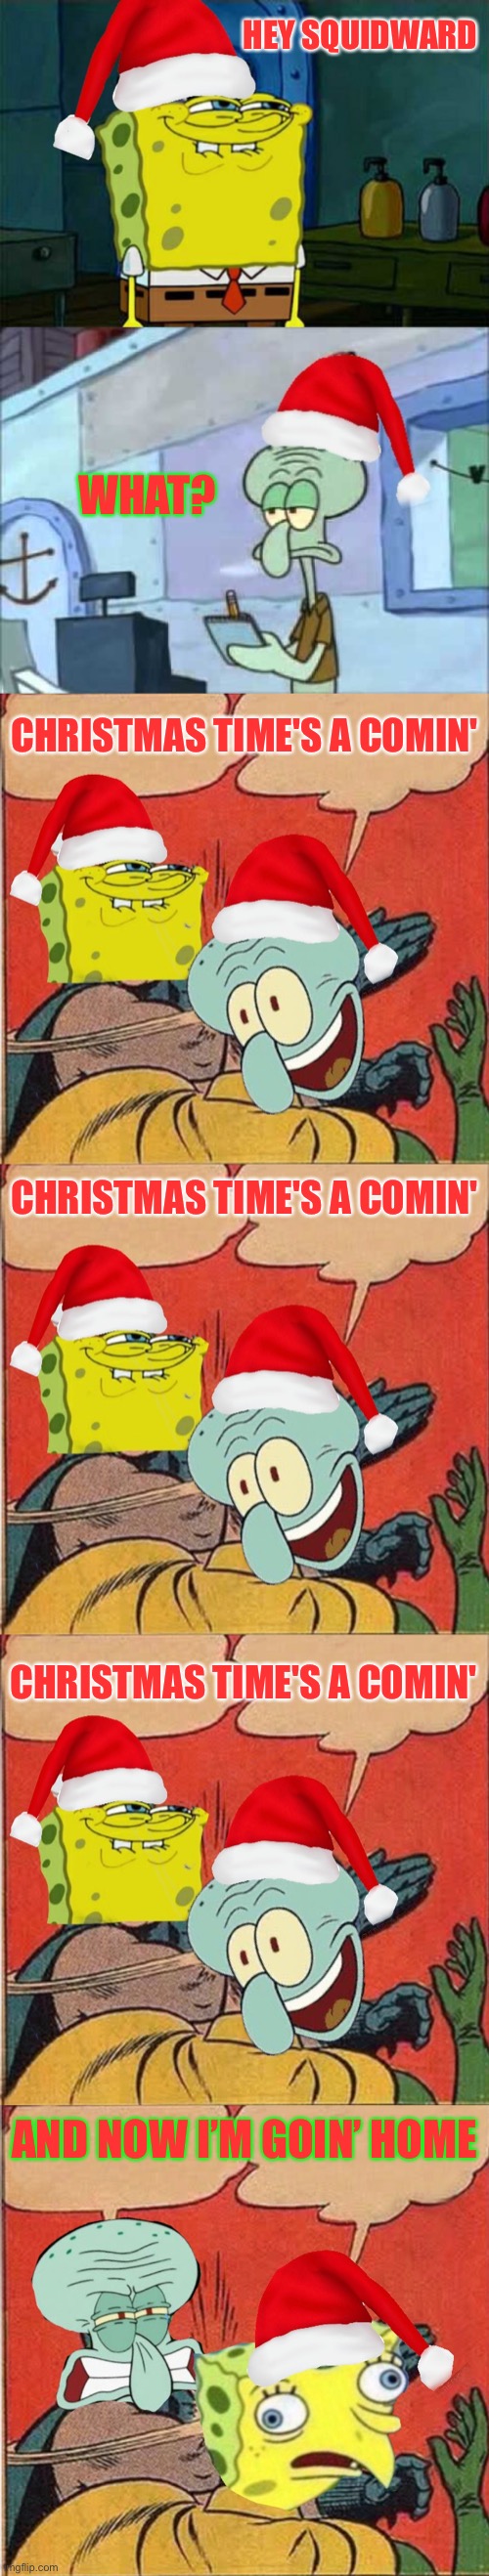 Can you hear them bells? Spongebob Christmas Weekend Dec 11-13 a Kraziness_all_the_way, EGOS, MeMe_BOMB1, 44colt & TD1437 event | HEY SQUIDWARD; WHAT? CHRISTMAS TIME'S A COMIN'; CHRISTMAS TIME'S A COMIN'; CHRISTMAS TIME'S A COMIN'; AND NOW I’M GOIN’ HOME | image tagged in spongebob christmas weekend,kraziness_all_the_way,egos,meme_bomb1,44colt,td1437 | made w/ Imgflip meme maker